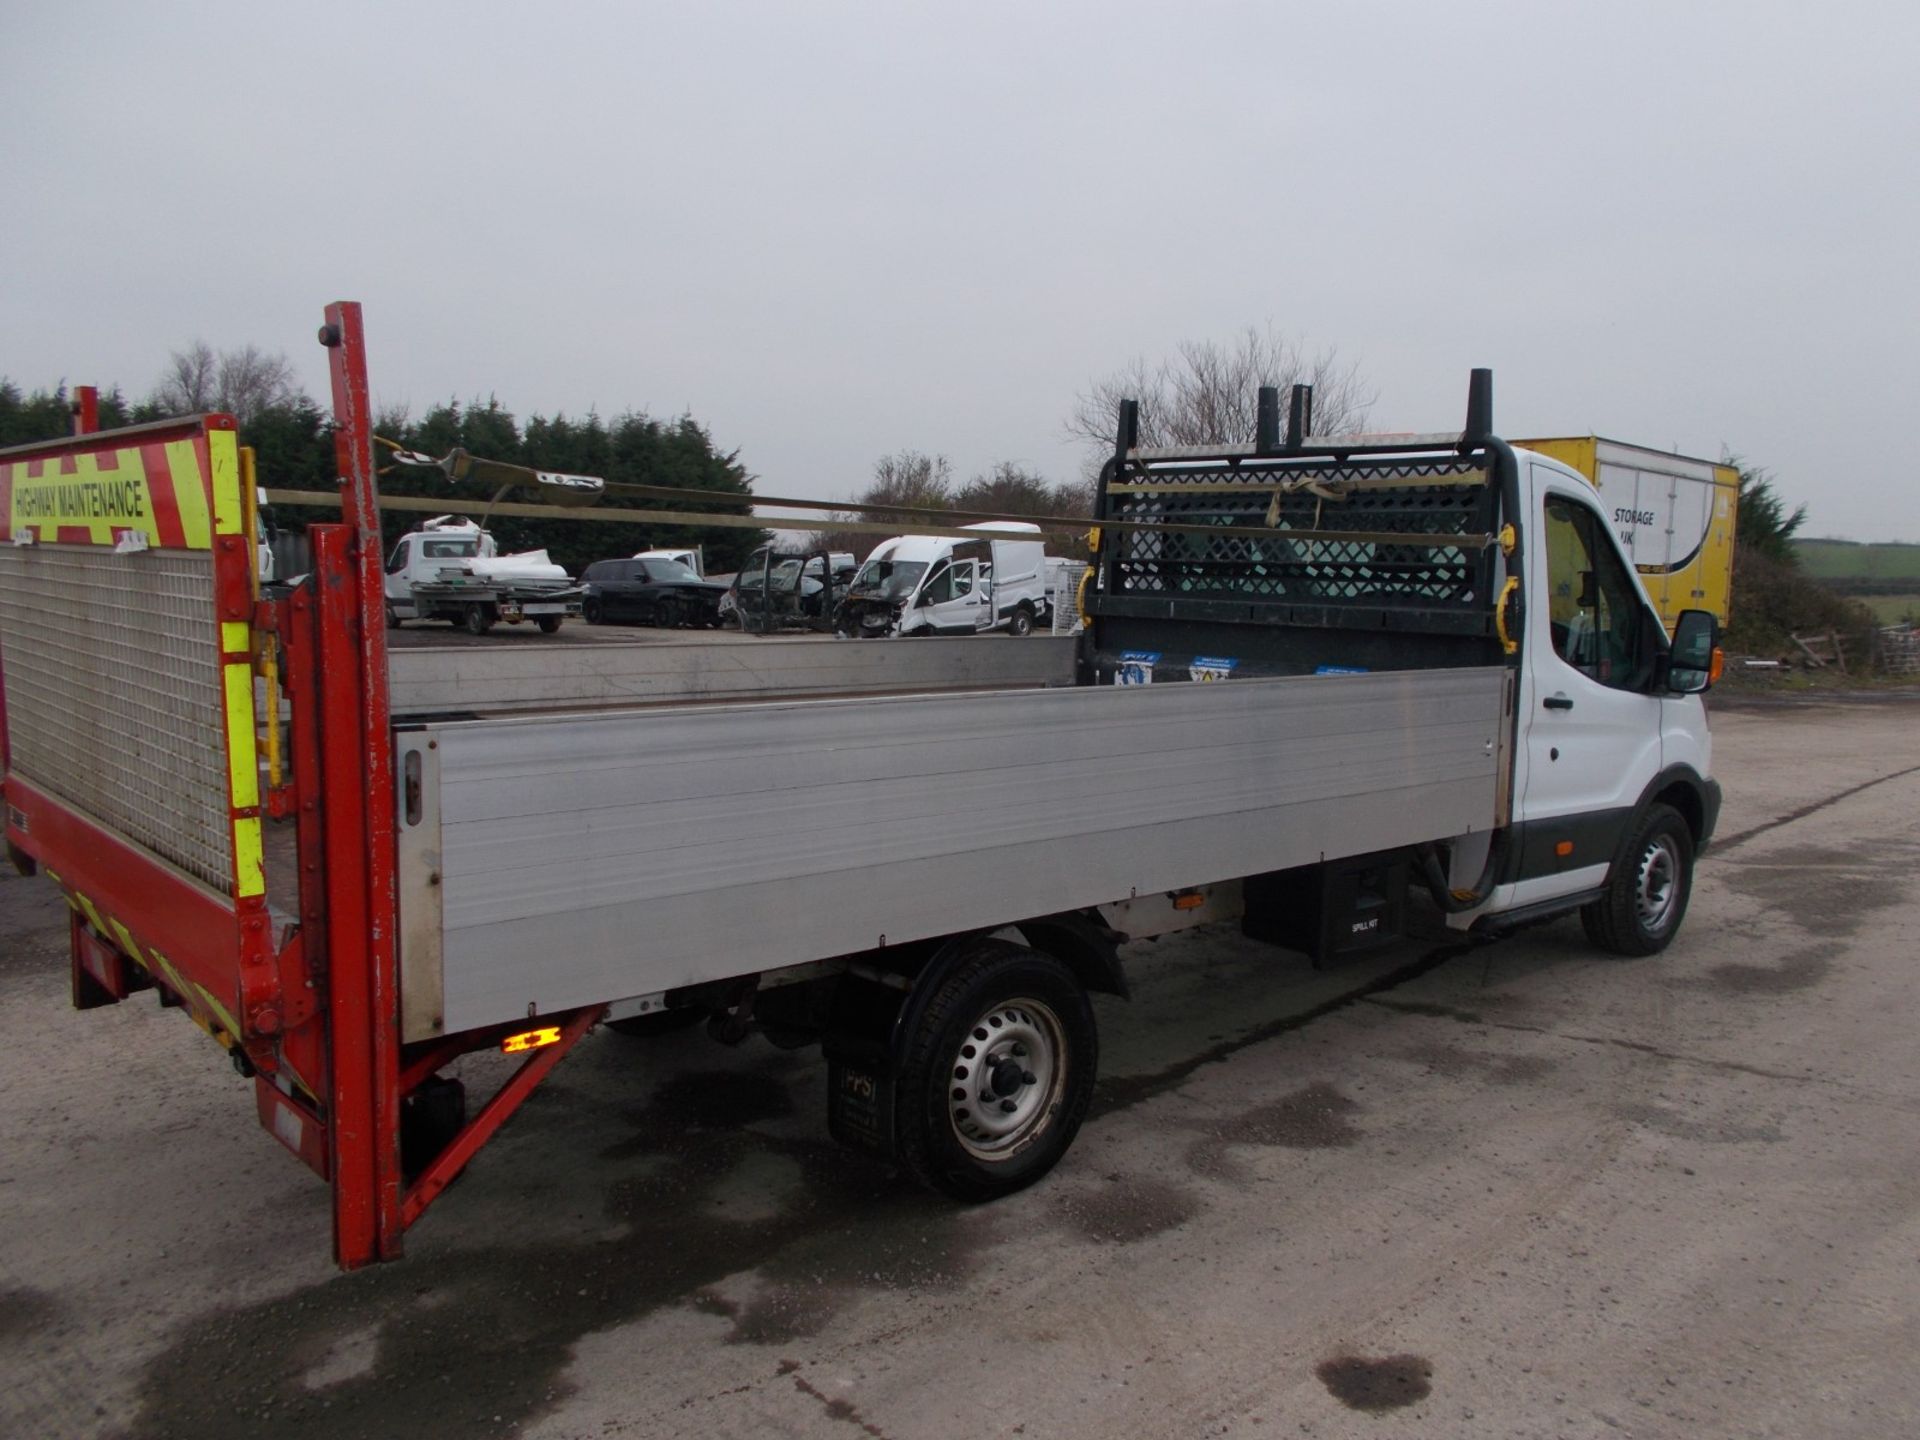 2018/68 FORD TRANSIT 350 DROPSIDE LORRY, 2.0 DIESEL, 6 SPEED MANUAL, 59K MILES, STARTS RUNS DRIVES - Image 7 of 24